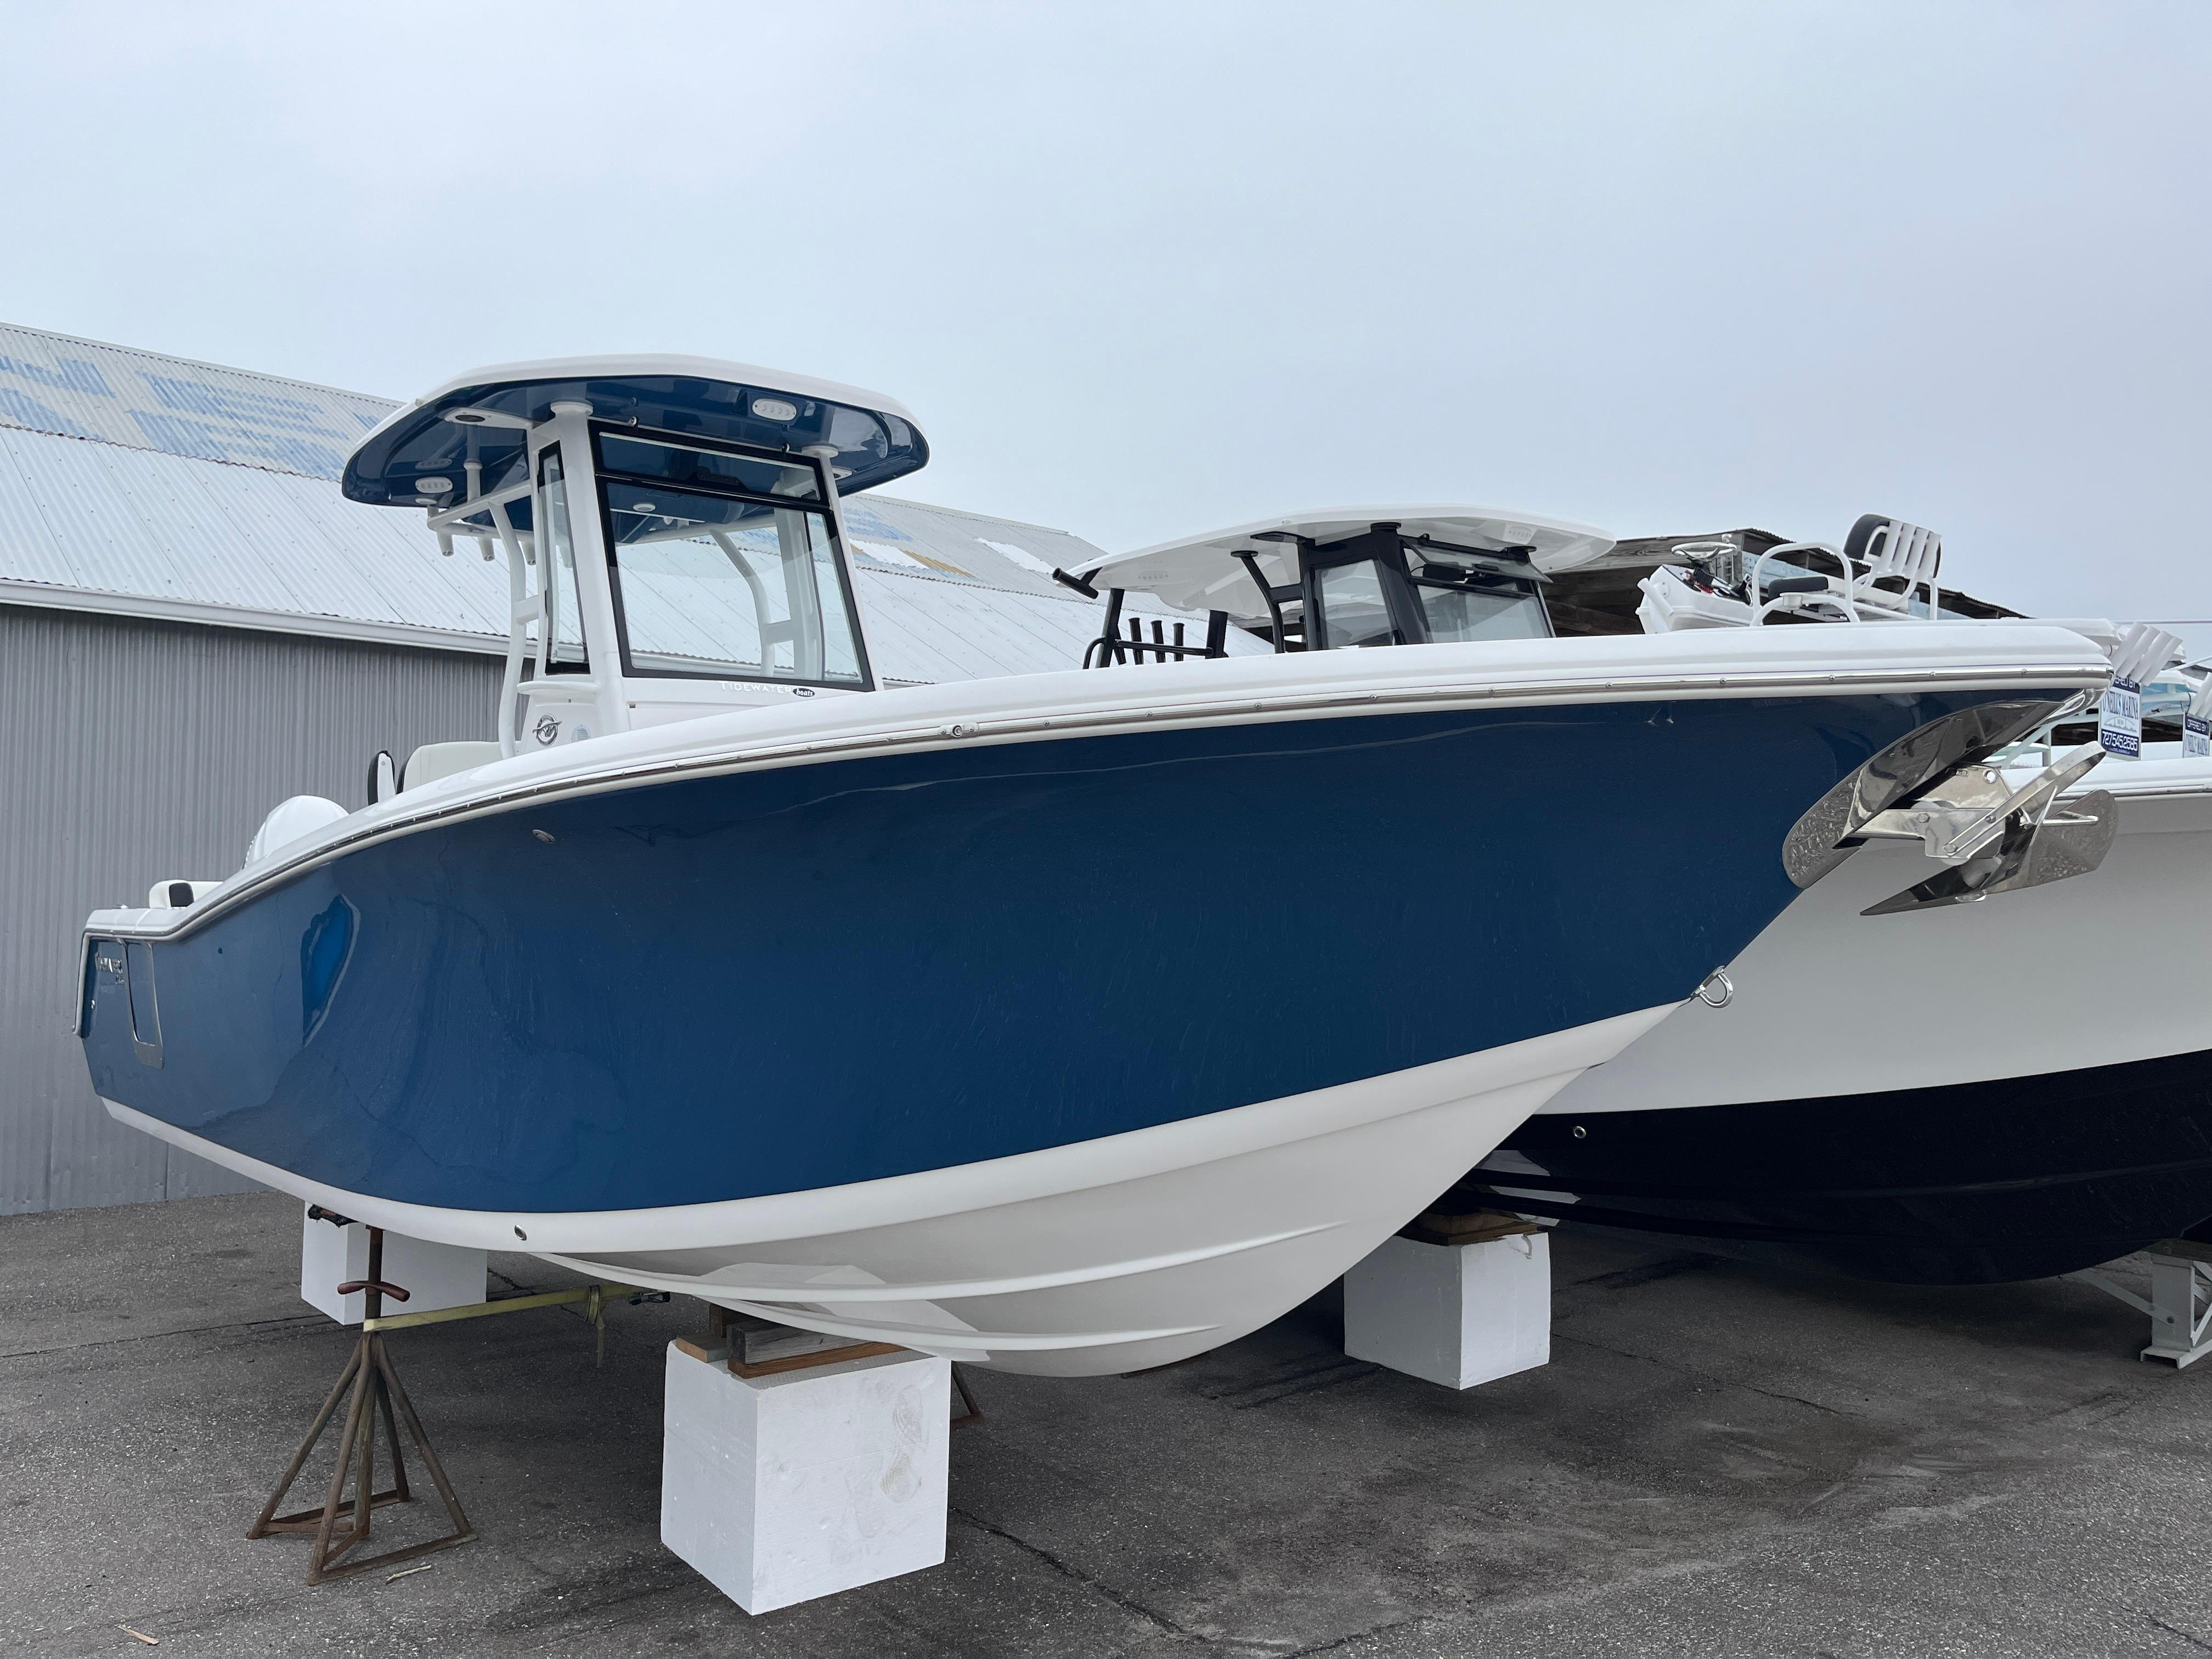 Tidewater boats for sale - Boat Trader